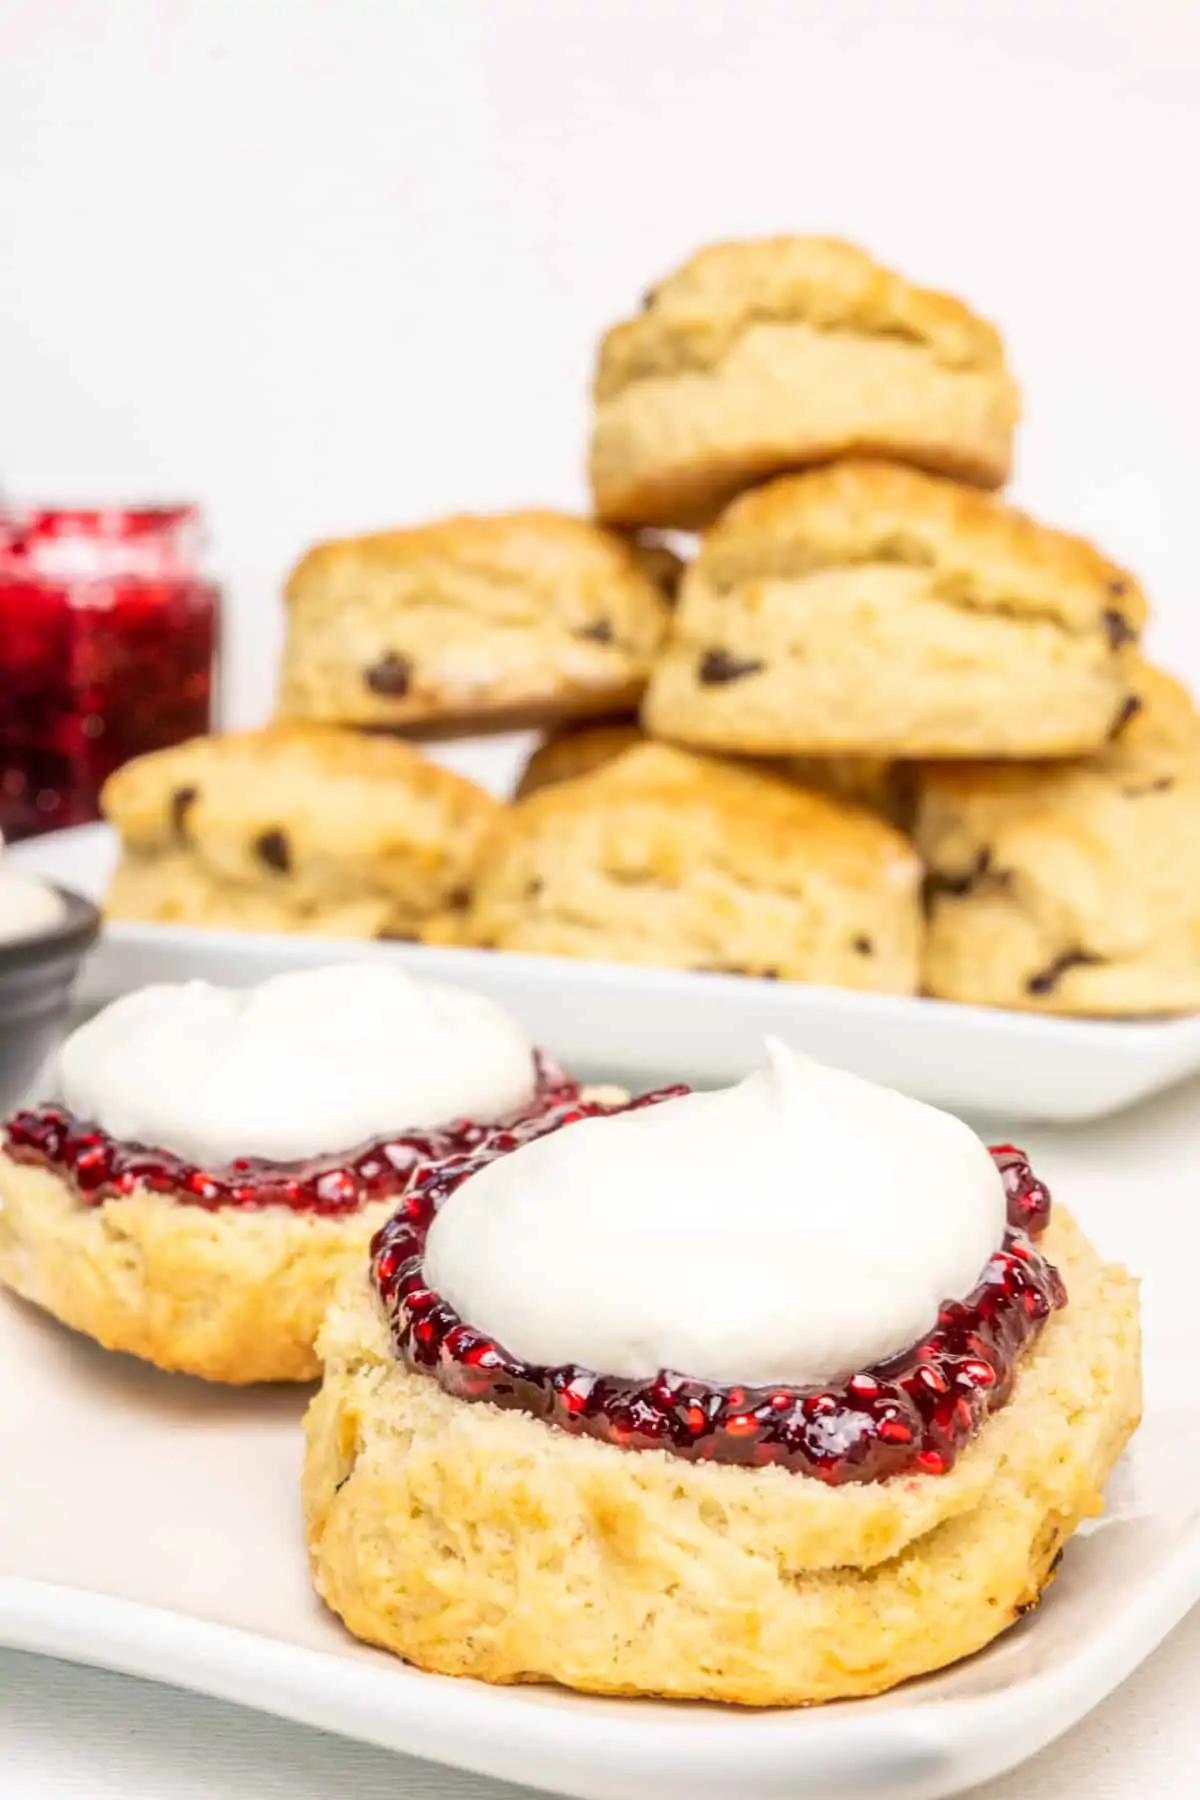 A scone halved and topped with raspberry jam and a dollop of whipped cream, in front of a stack of scones on a plate.